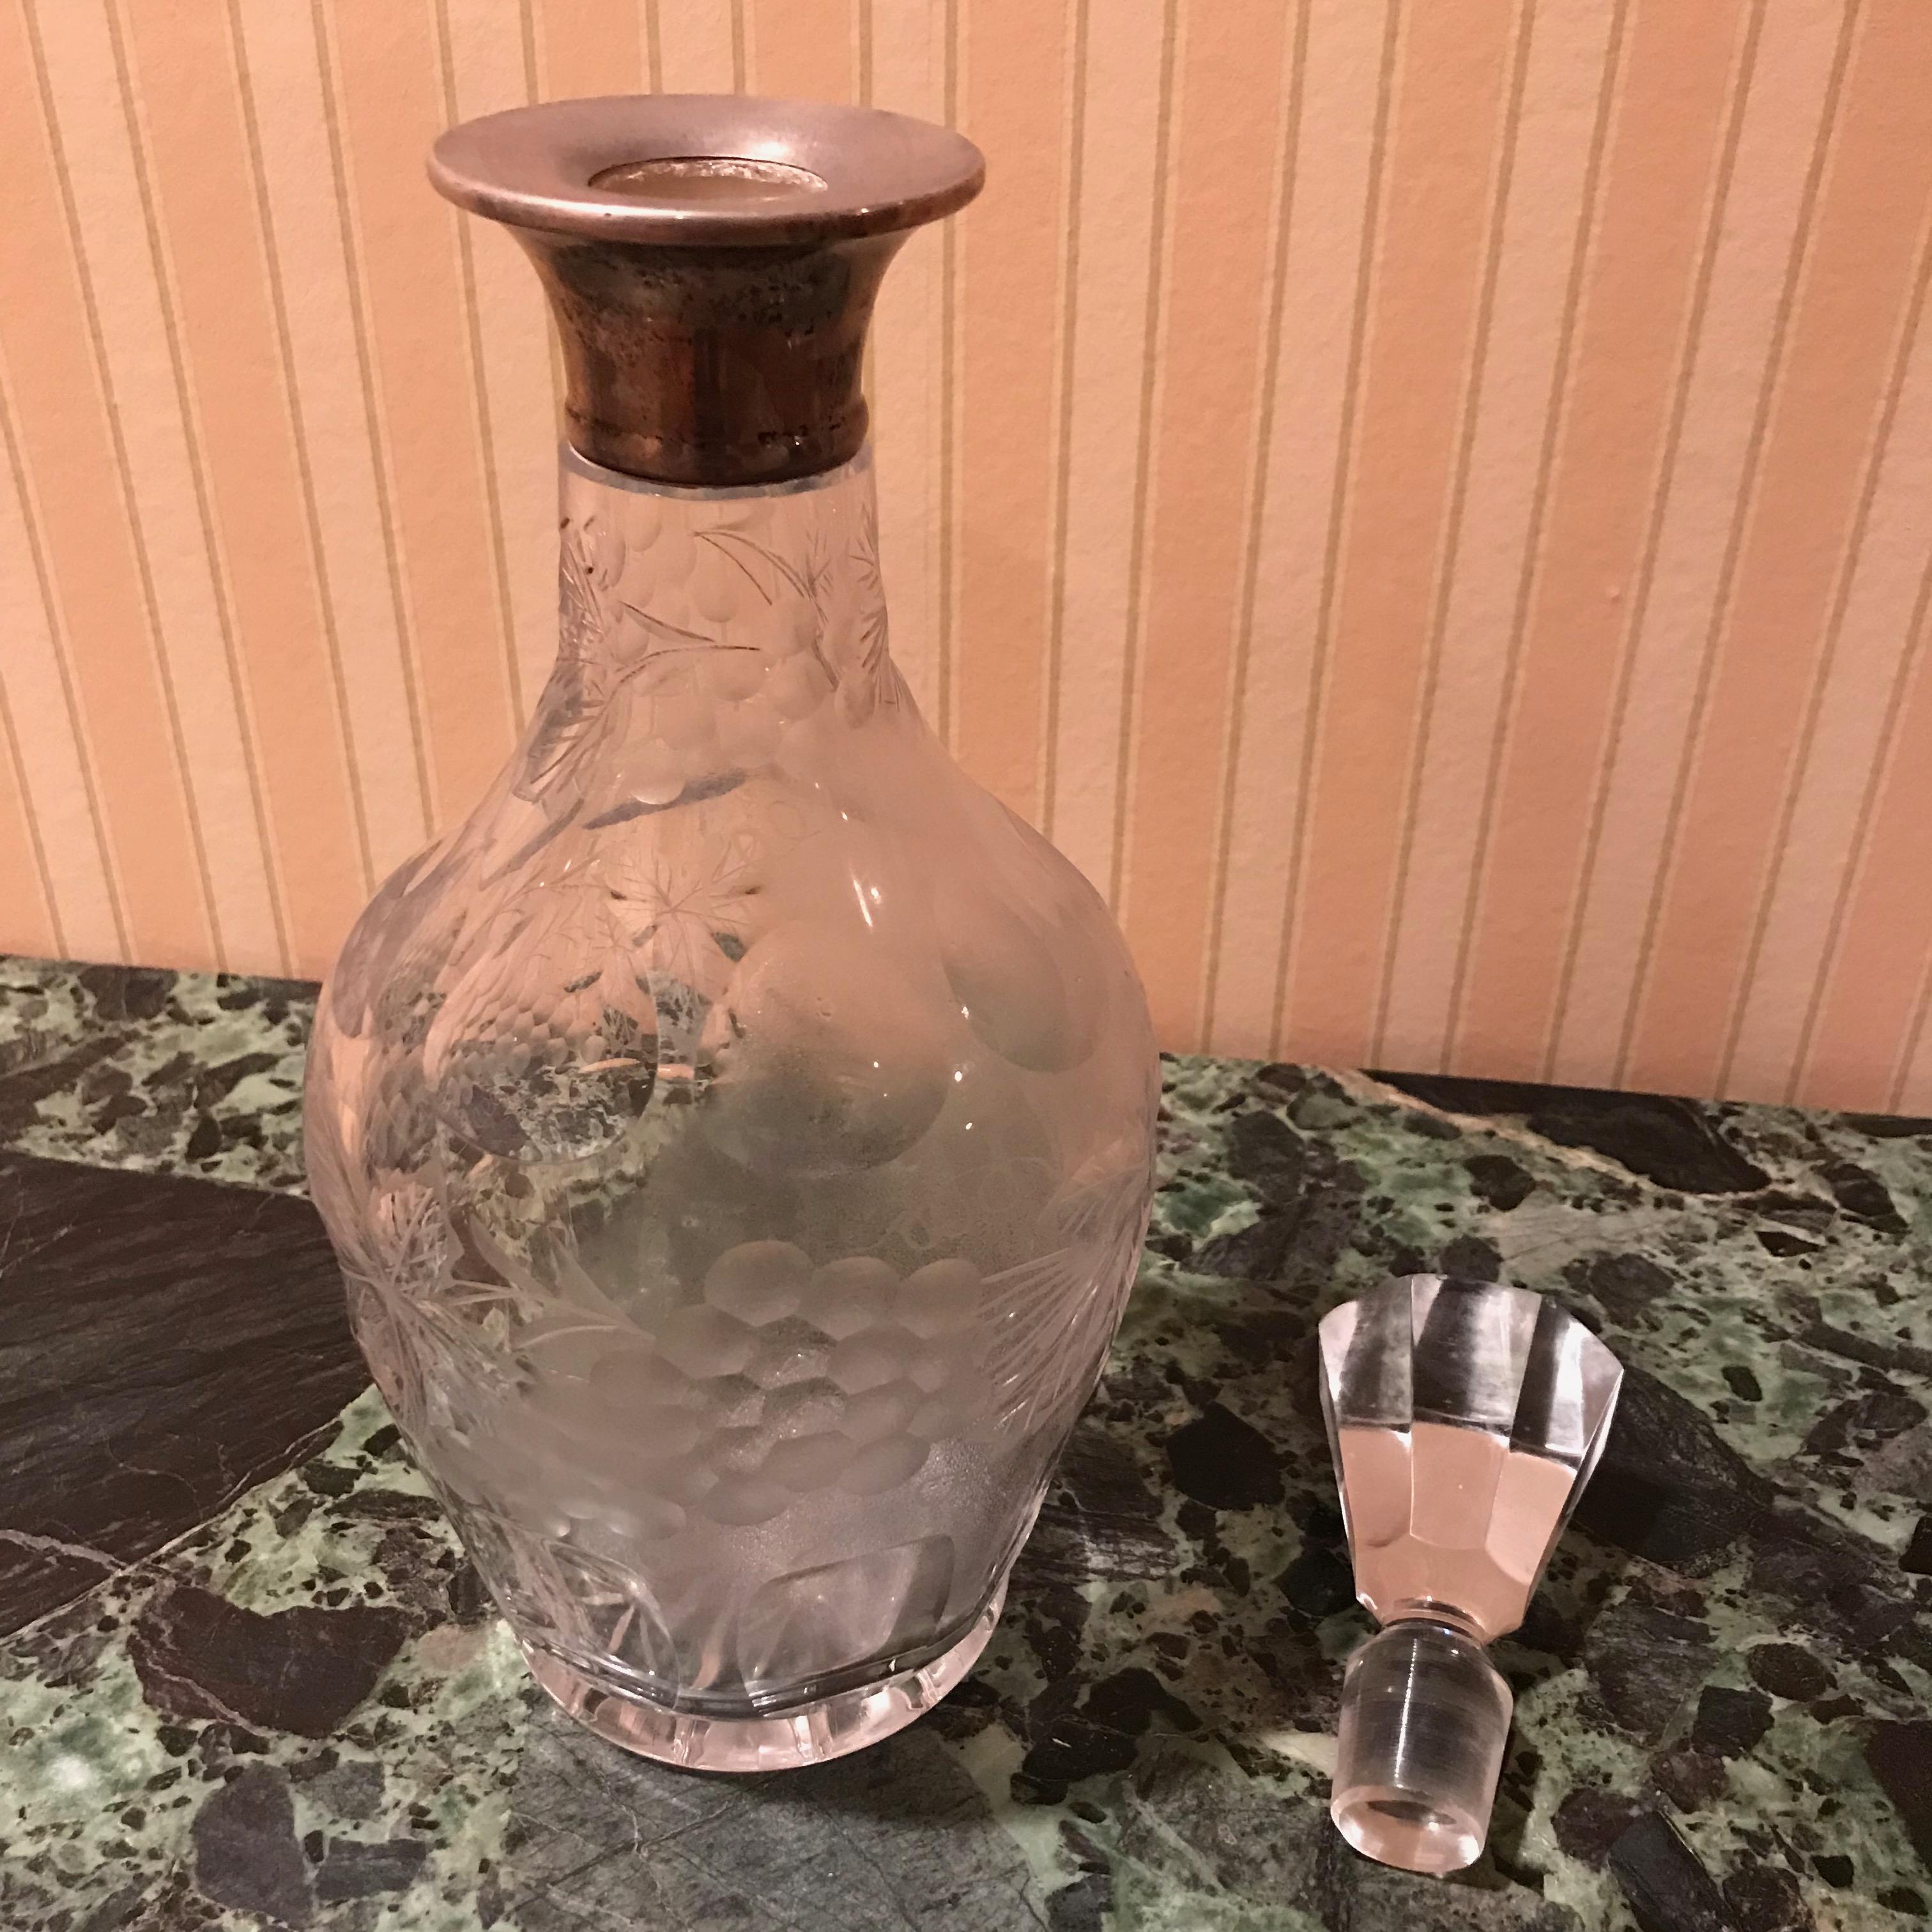 19th century glass decanters